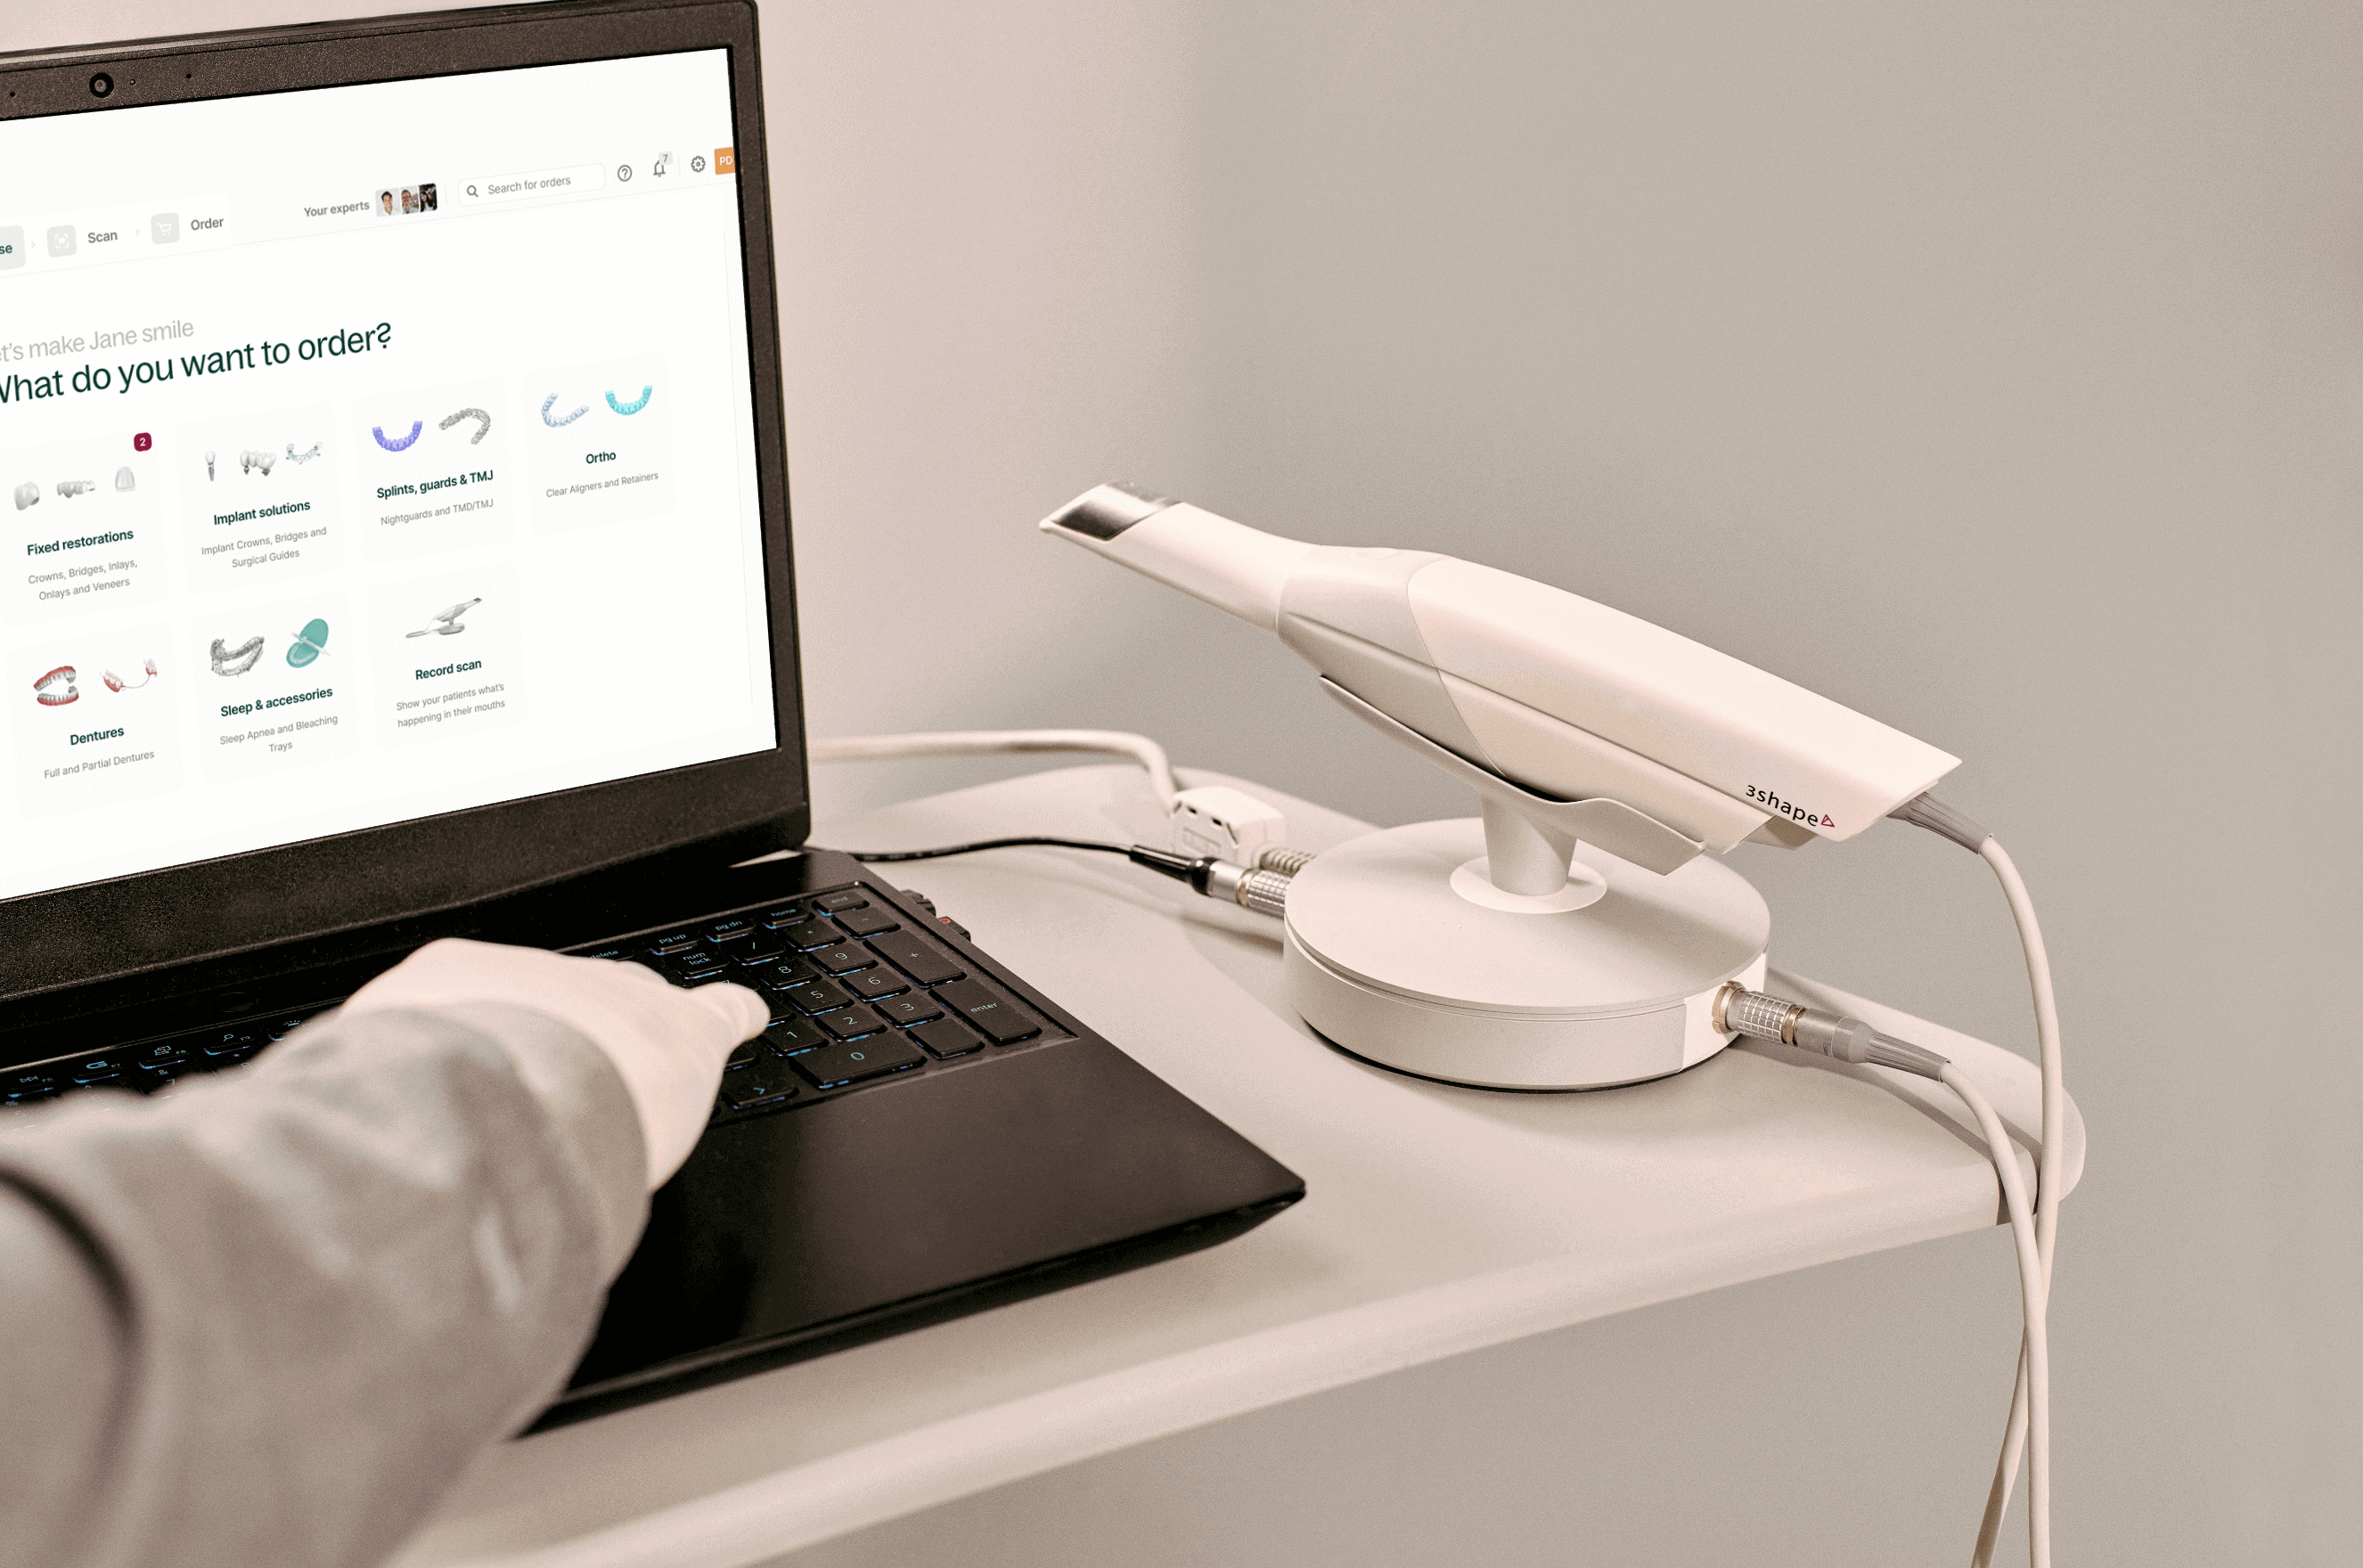 dandy provides dental practices with a free intraoral scanner